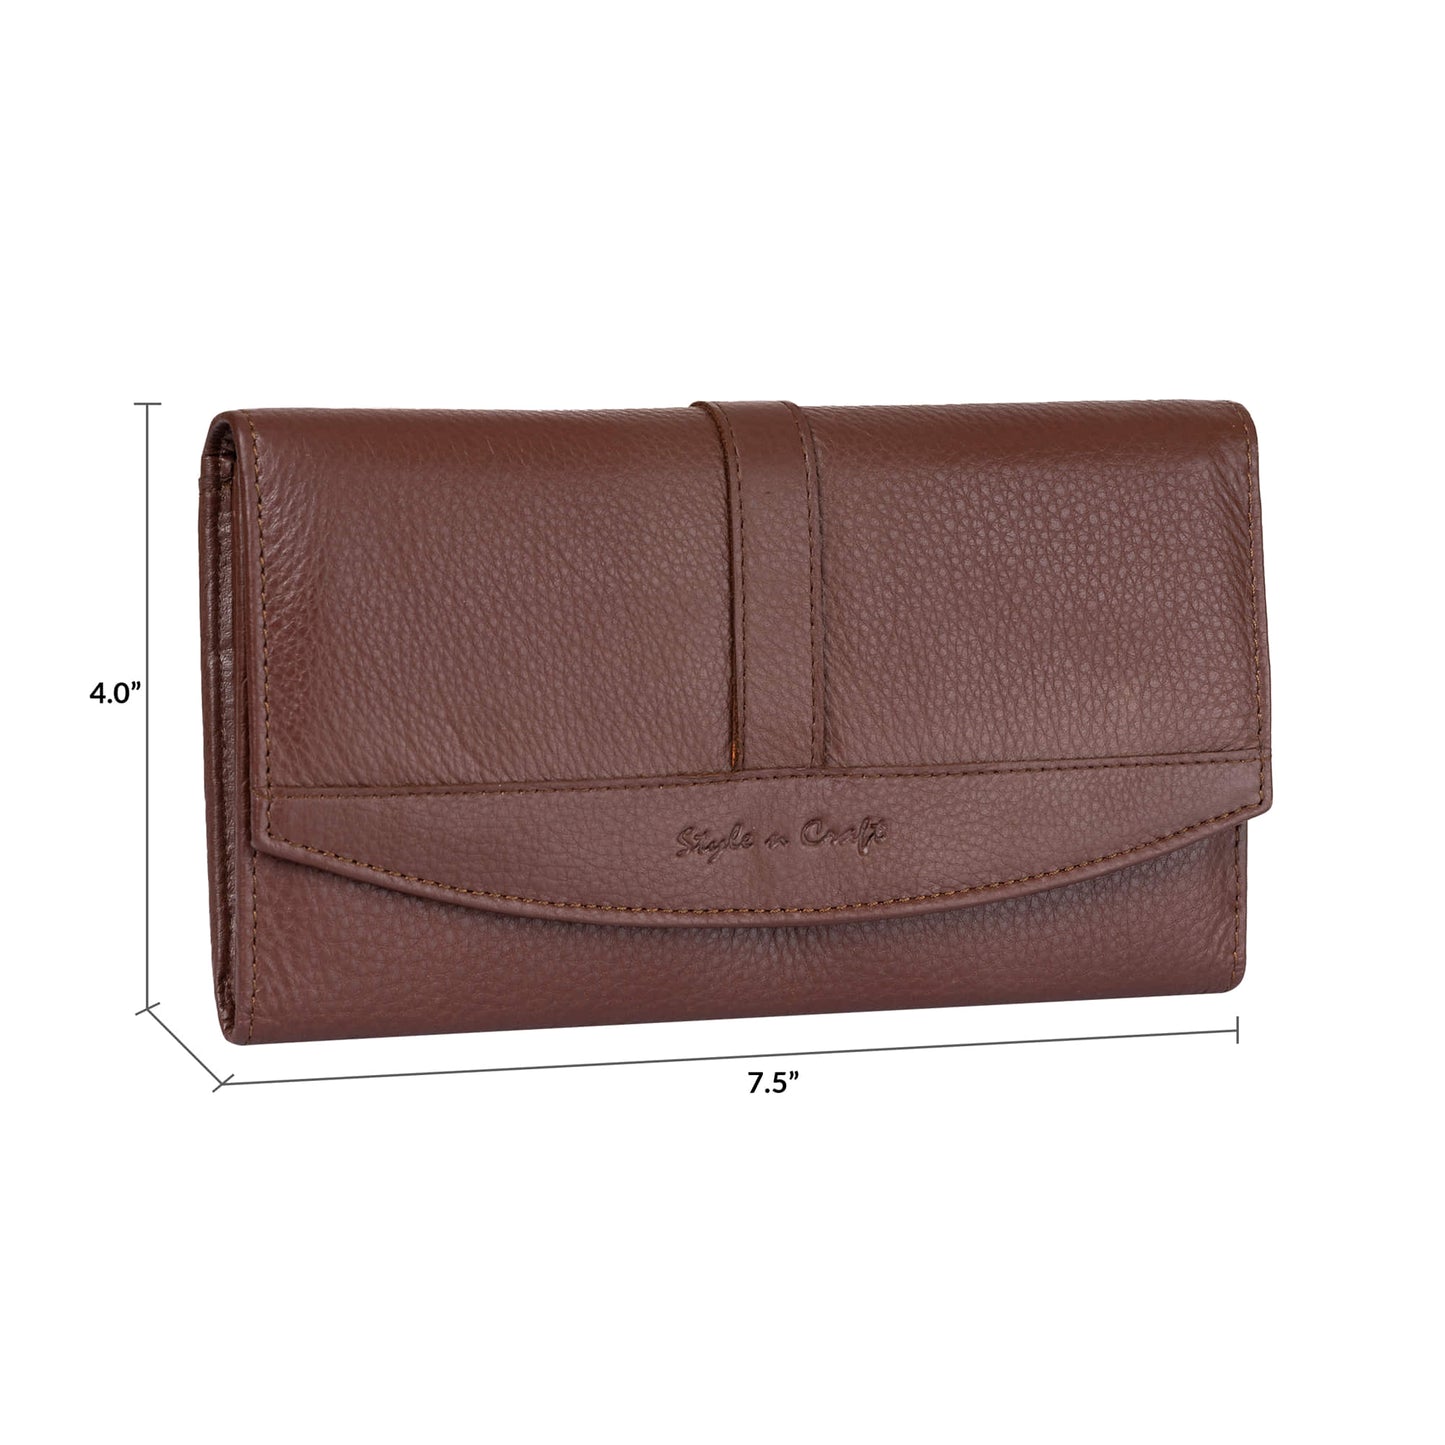 Style n Craft 391105 Double Fold Ladies Long Clutch Wallet in High Grade Brown Full Grain Leather - Front Angled View - Closed - Showing the Dimensions